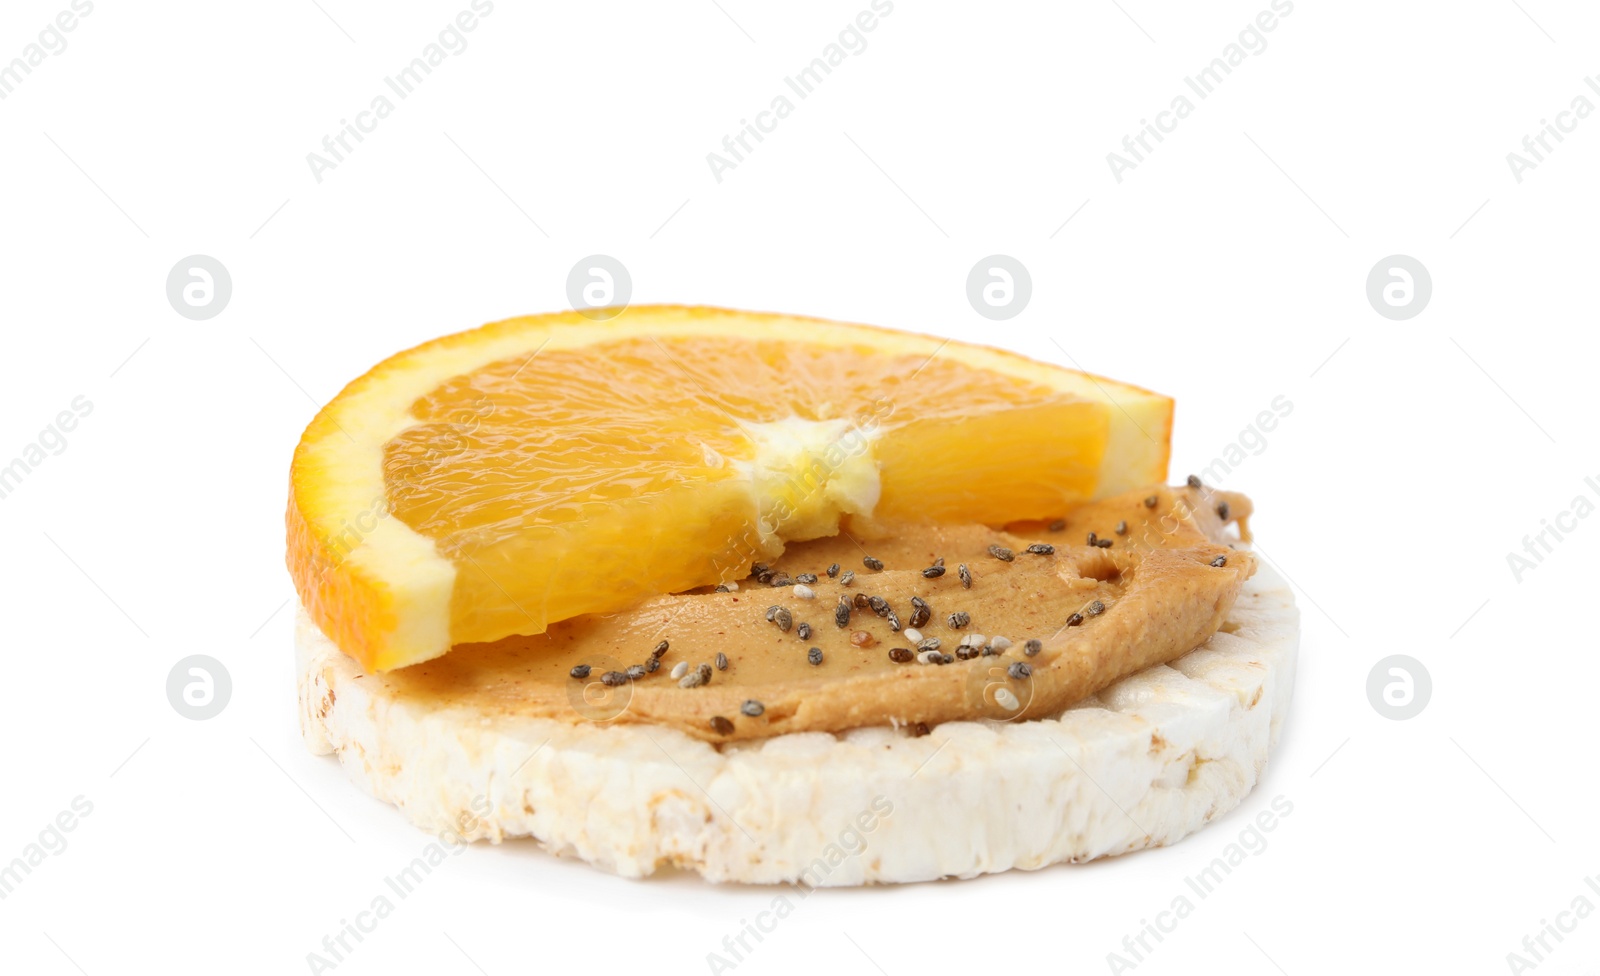 Photo of Puffed rice cake with peanut butter and orange isolated on white